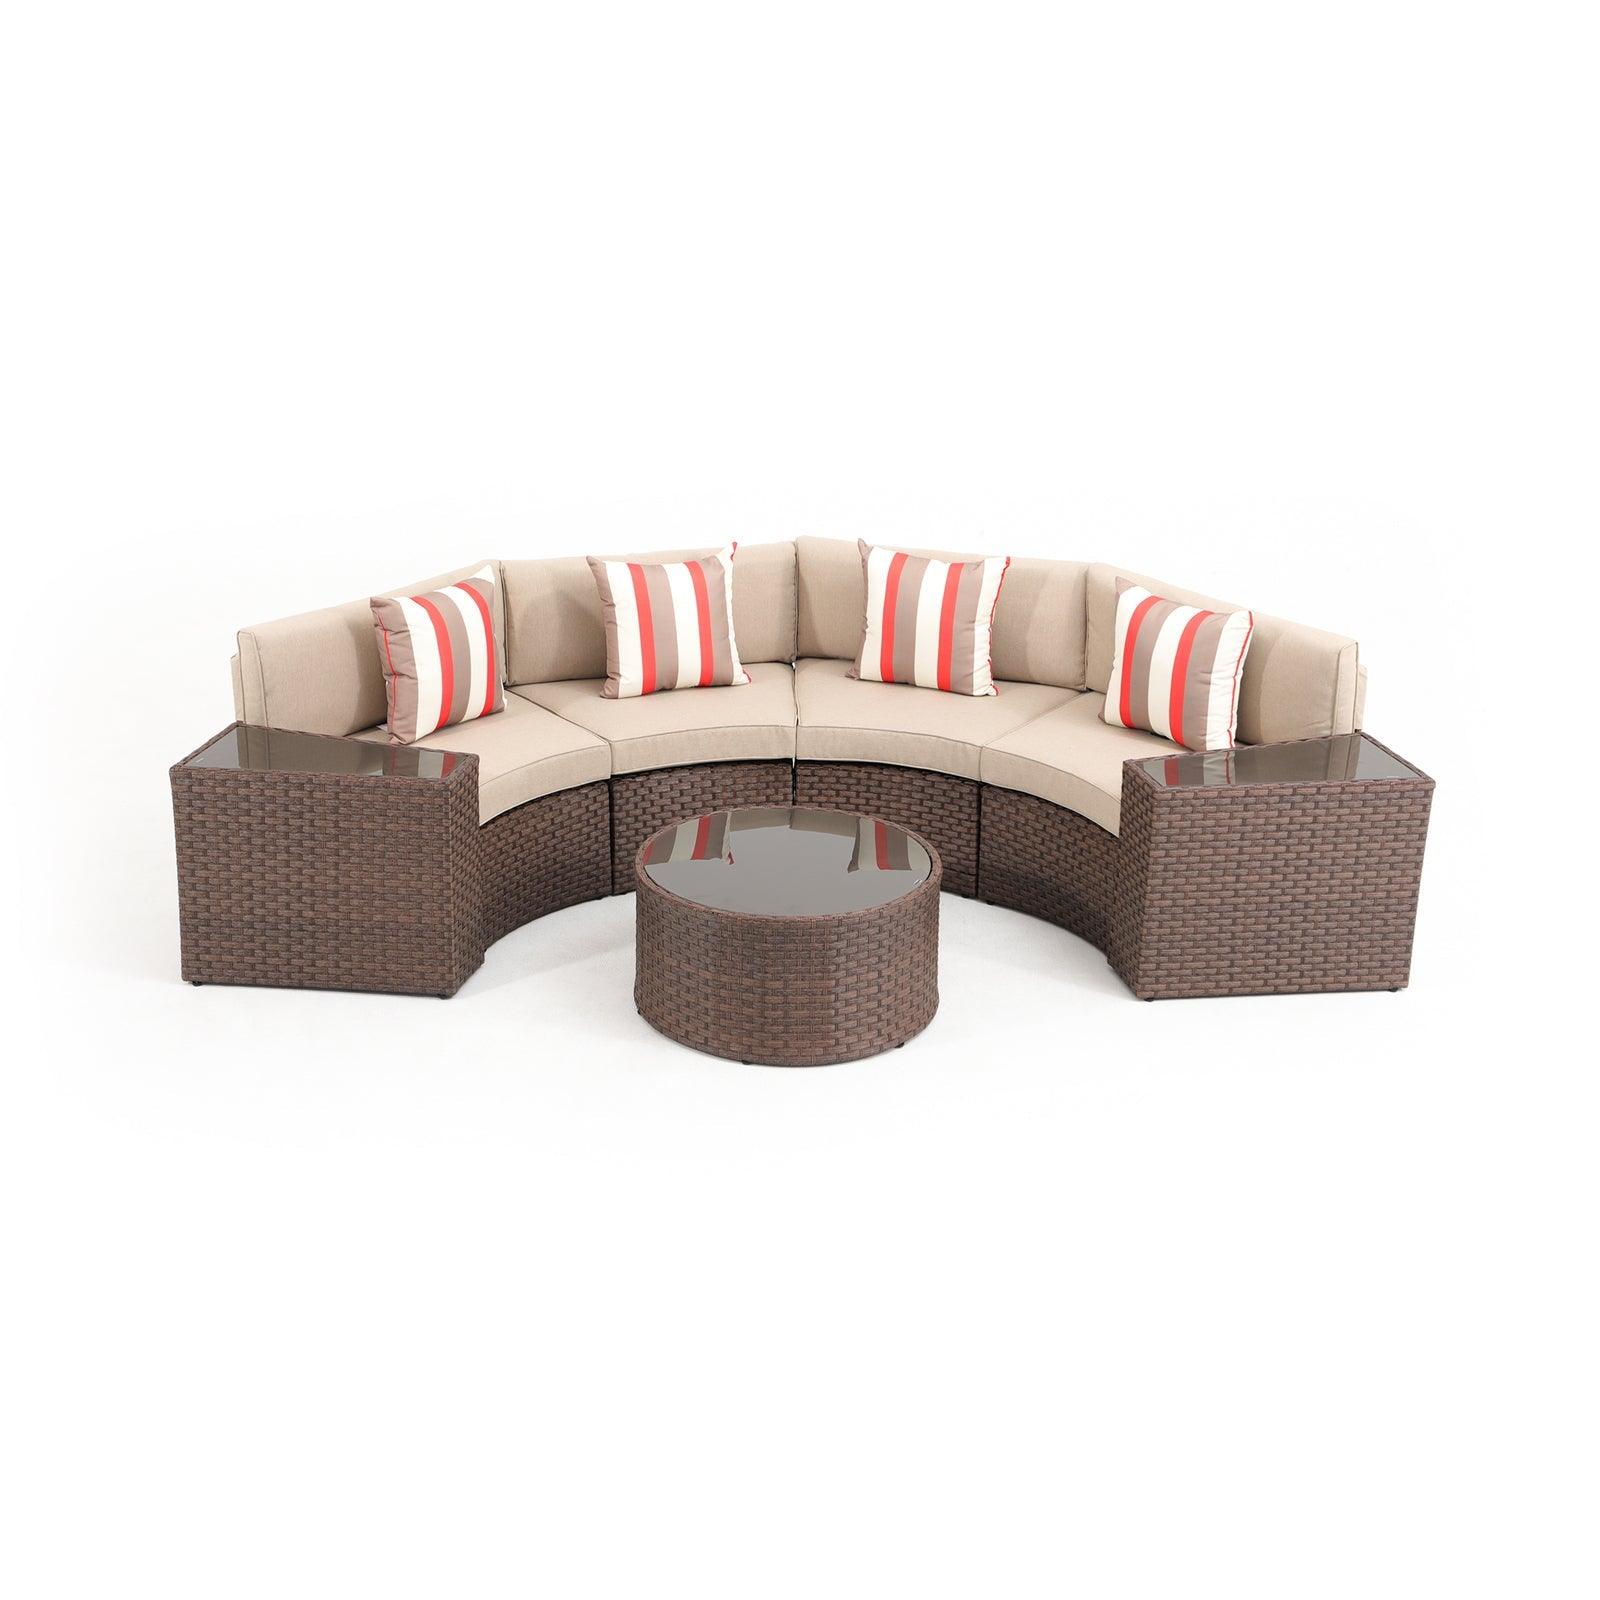 Boboli 7-piece Brown Wicker Curved Sectional Set with beige cushions, 1 Round Glass Coffee Table + 2  glass top side tables + 4 sectional sofas, front - Jardina Furniture #color_Brown #piece_7-pc.